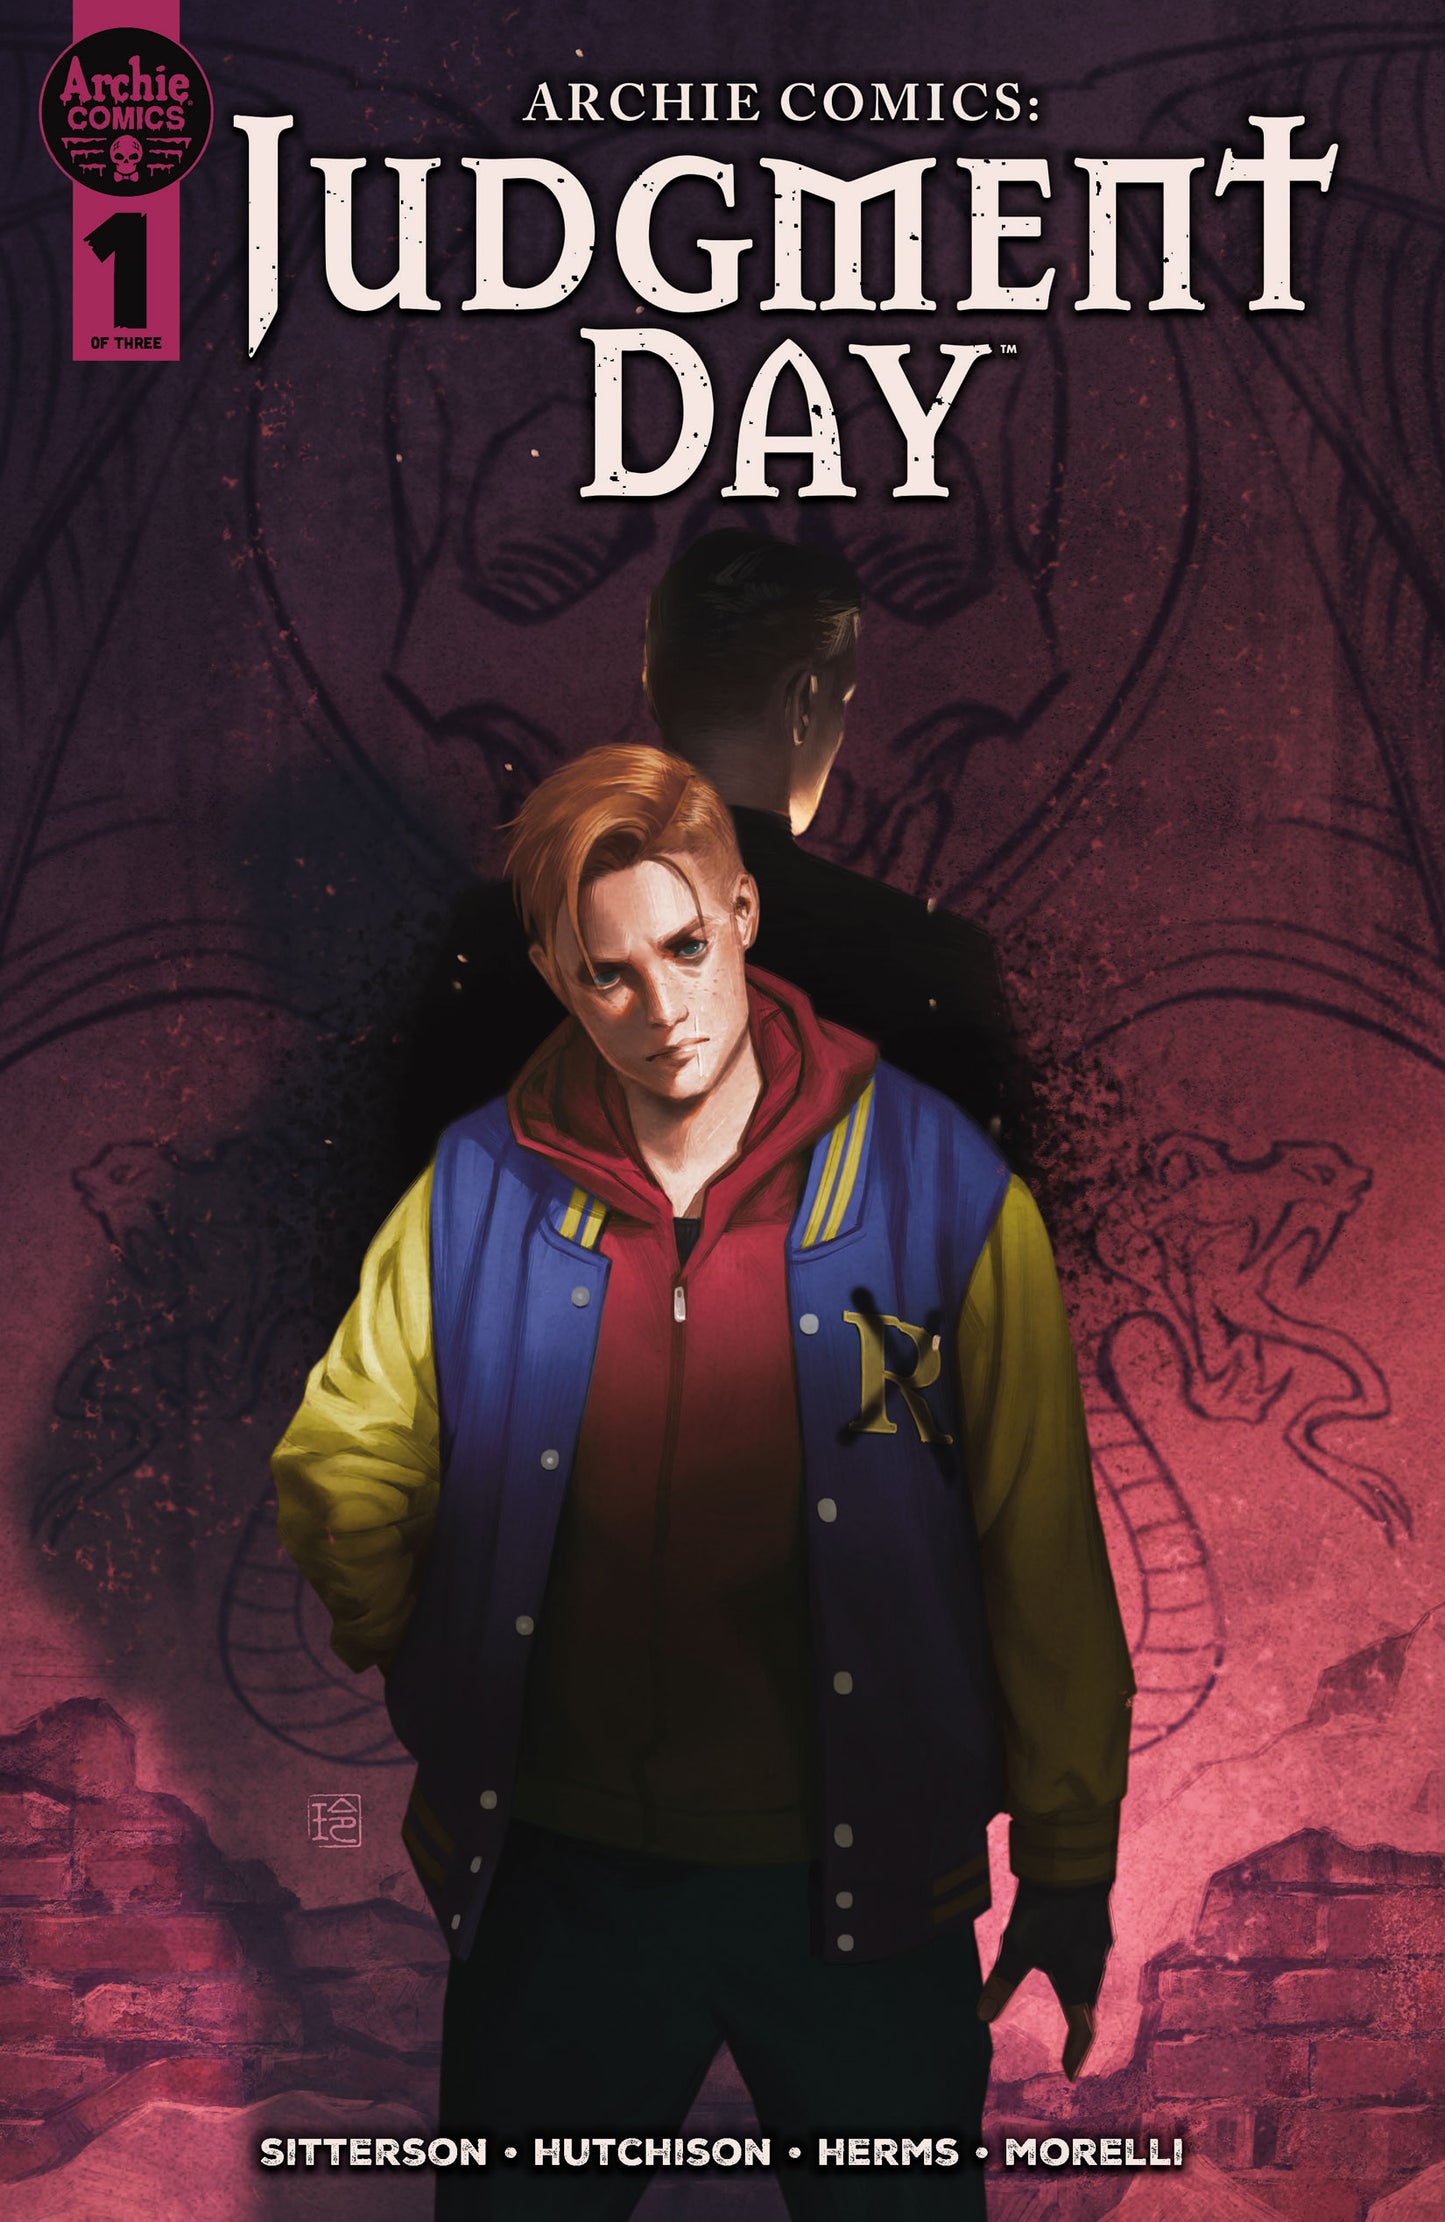 ARCHIE COMICS: JUDGMENT DAY #1 (of 3)